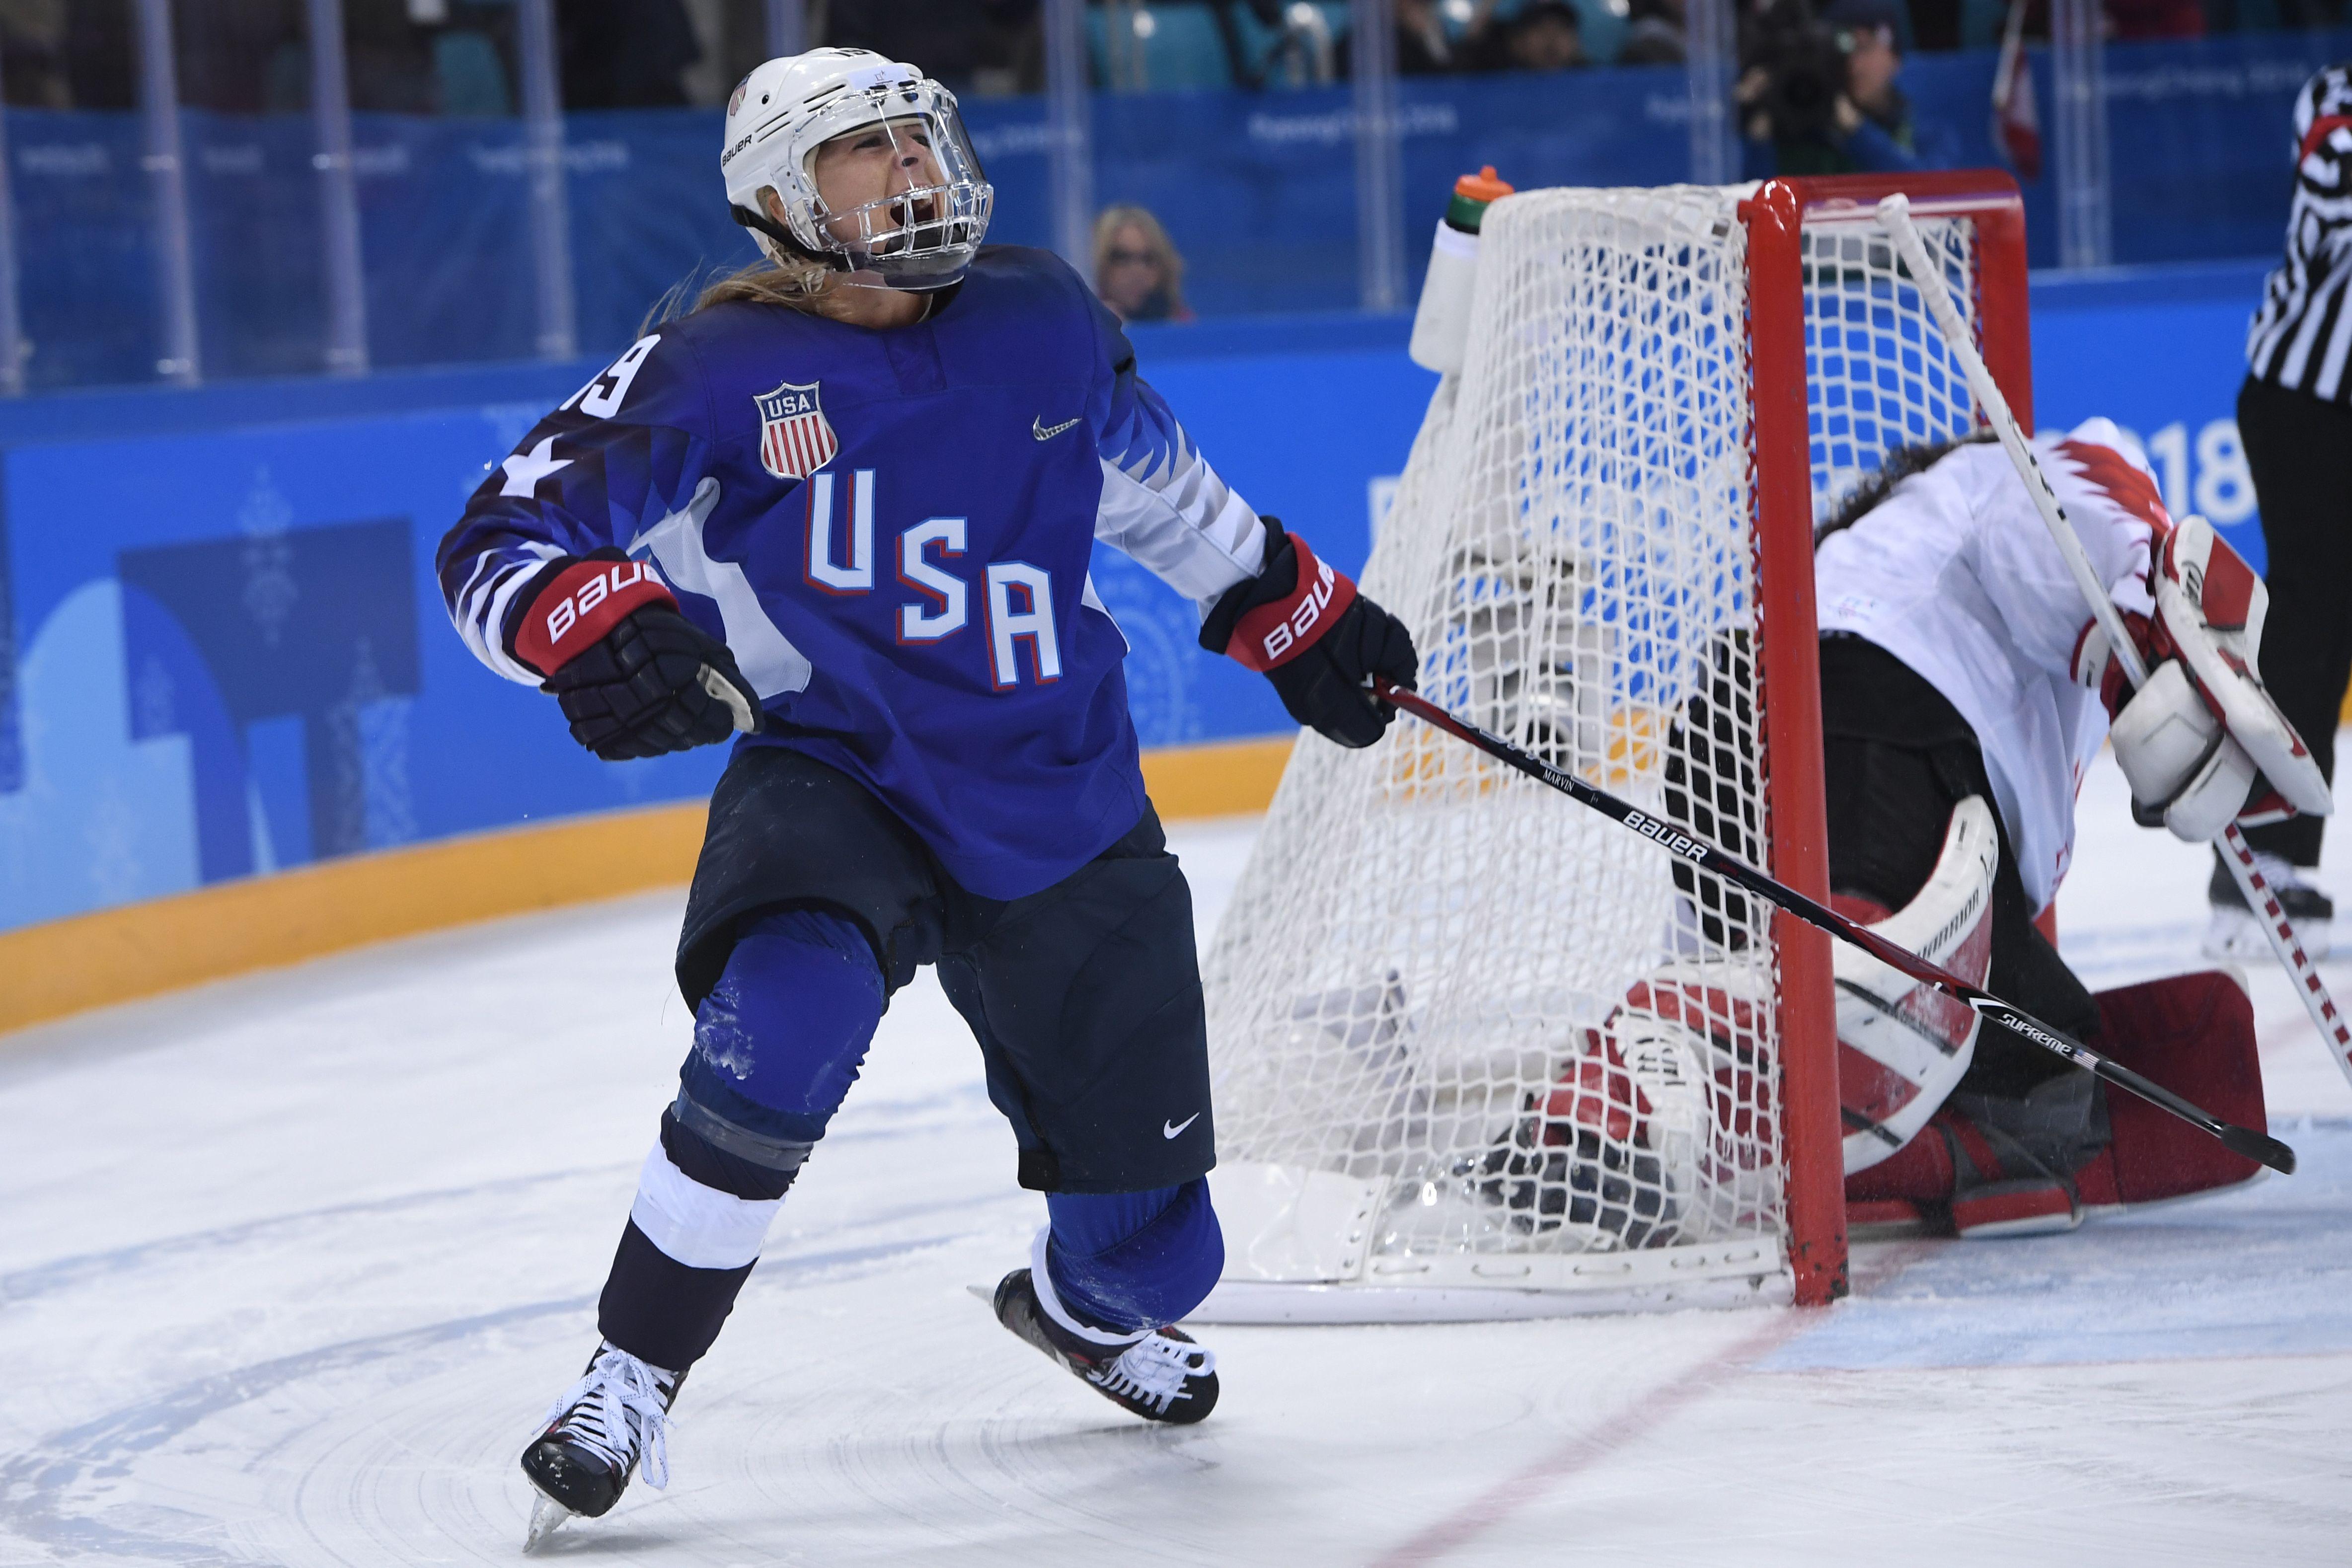 USA's Gigi Marvin scores during the penalty-shot shootout in the women's gold medal ice hockey match between the US and Canada during the Pyeongchang 2018 Winter Olympic Games at the Gangneung Hockey Centre in Gangneung on February 22, 2018.   / AFP PHOTO / JUNG Yeon-Je        (Photo credit should read JUNG YEON-JE/AFP/Getty Images)